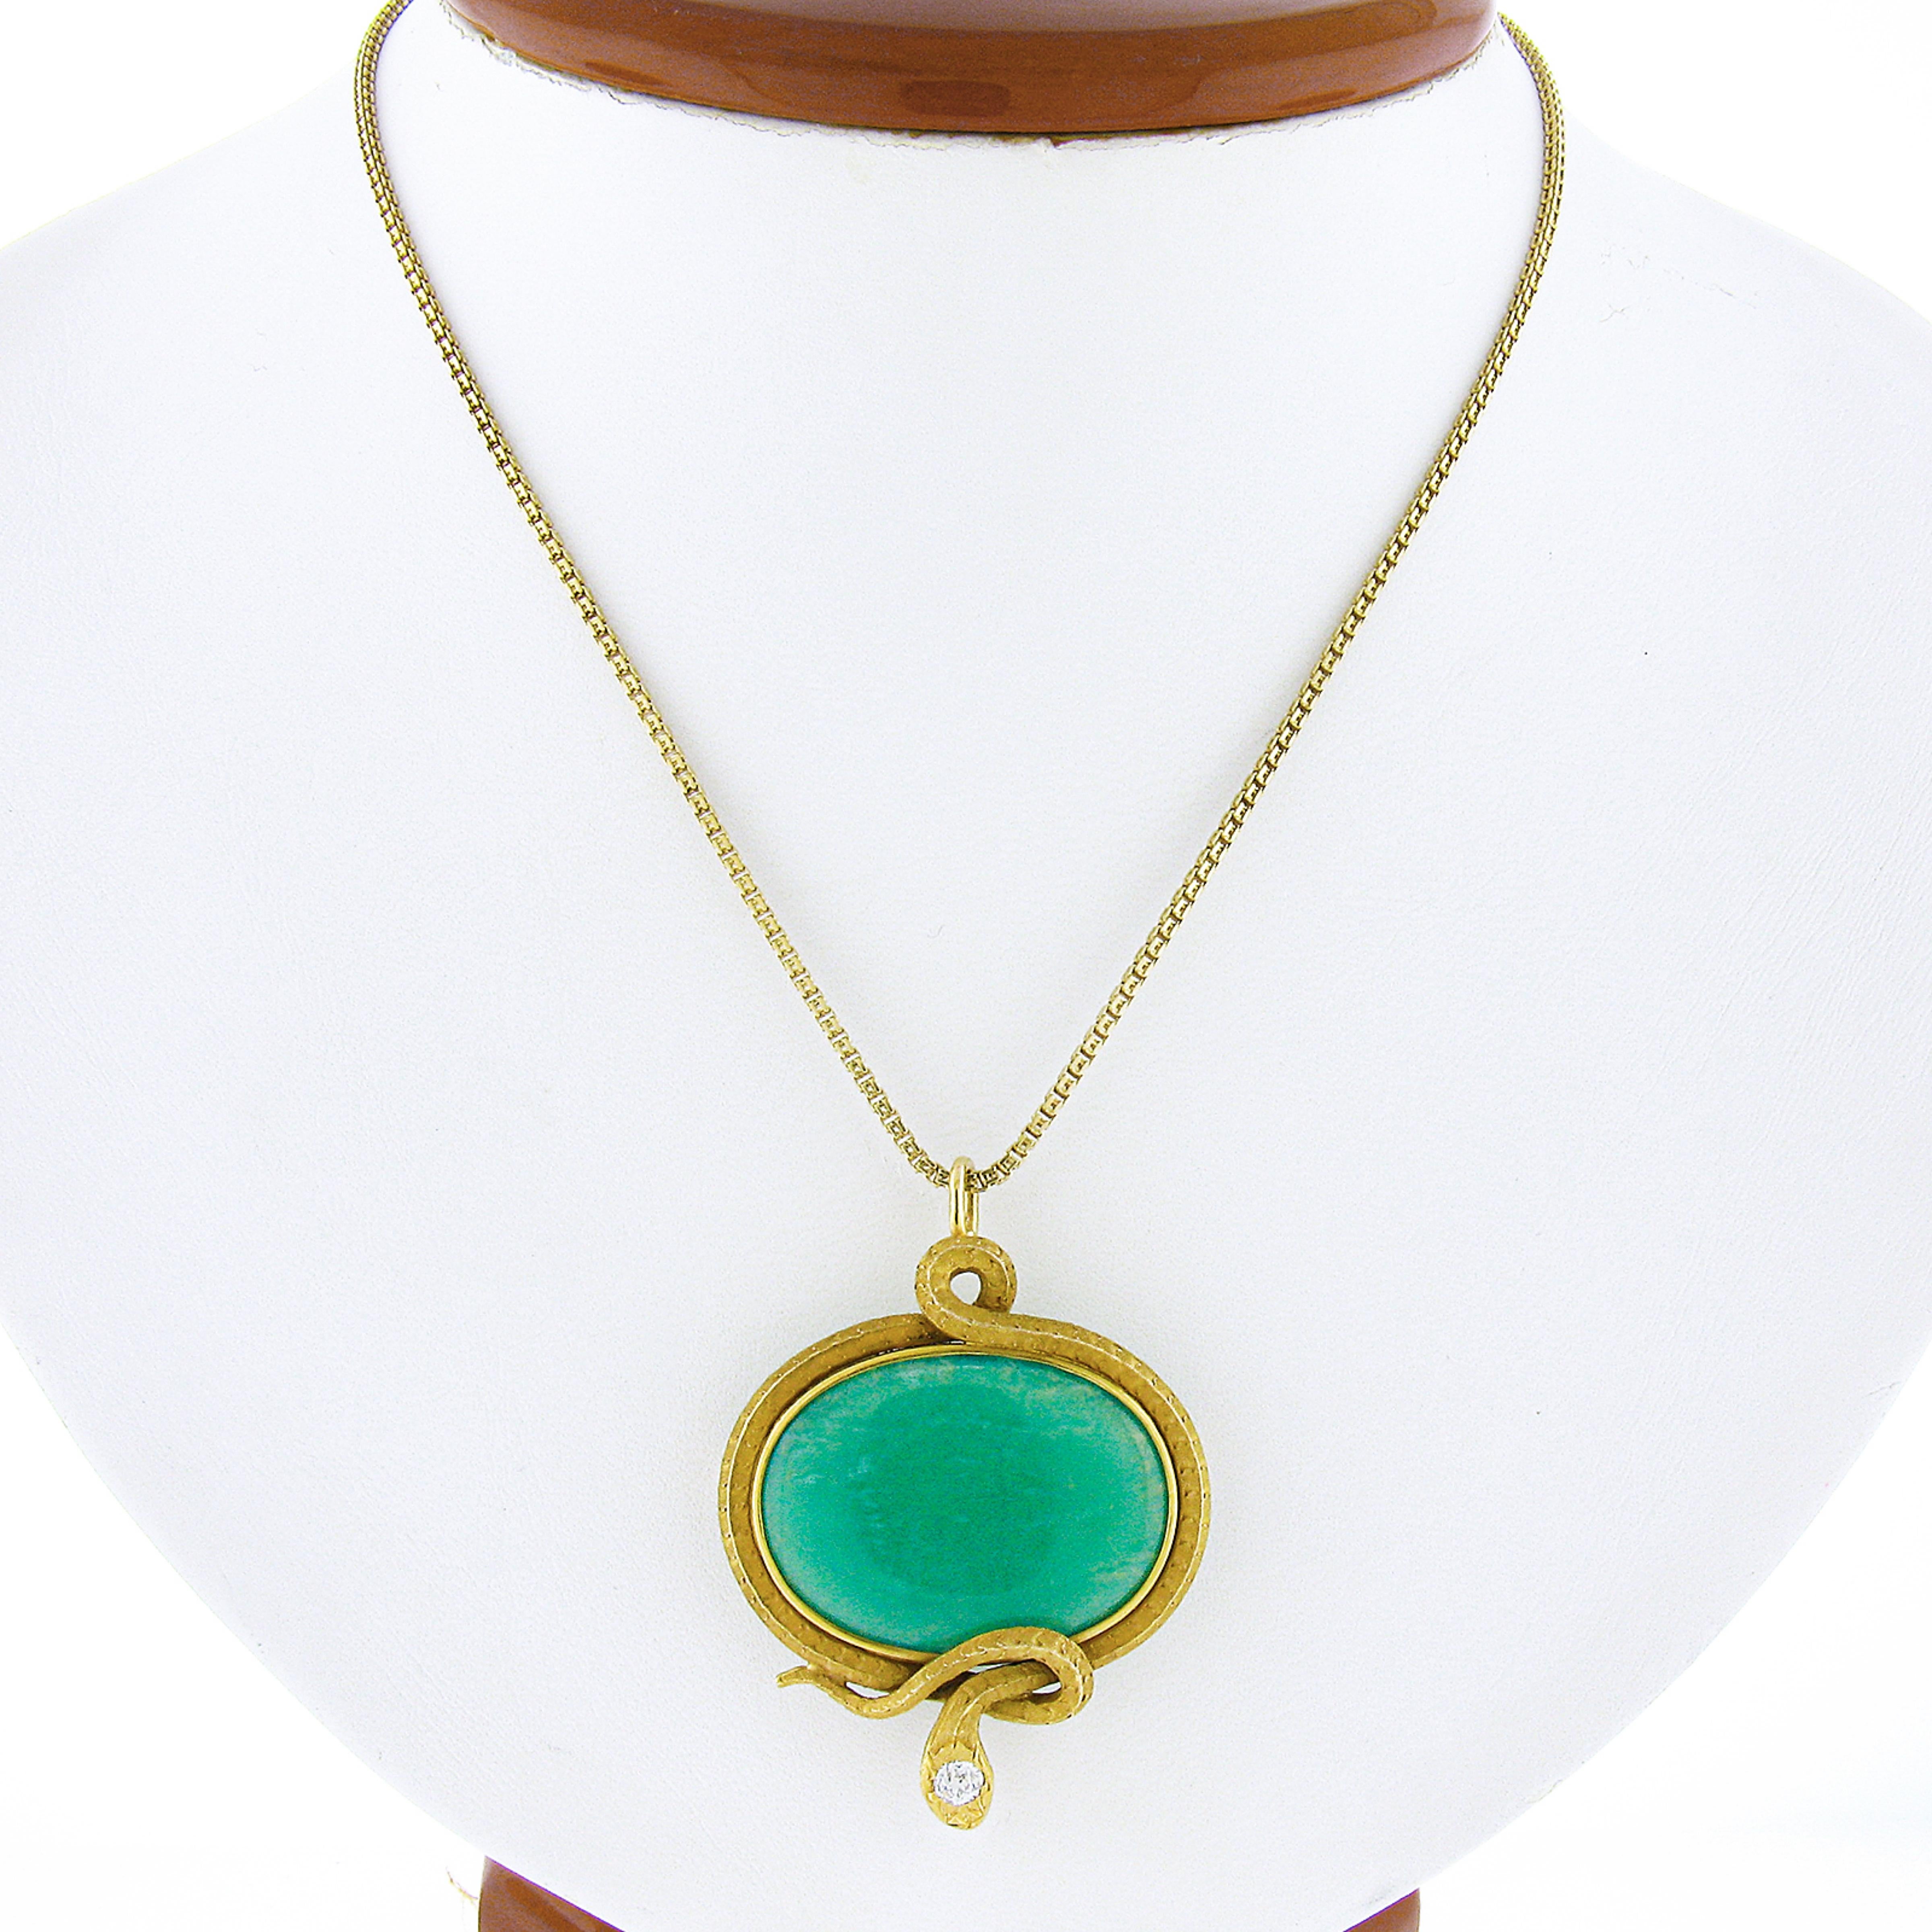 Here we have a gorgeous and very unique antique pendant/brooch that's crafted from solid 14k yellow gold. This outstanding piece features an oval cabochon cut natural chrysoprase stone neatly bezel set at the center of an incredibly detailed and